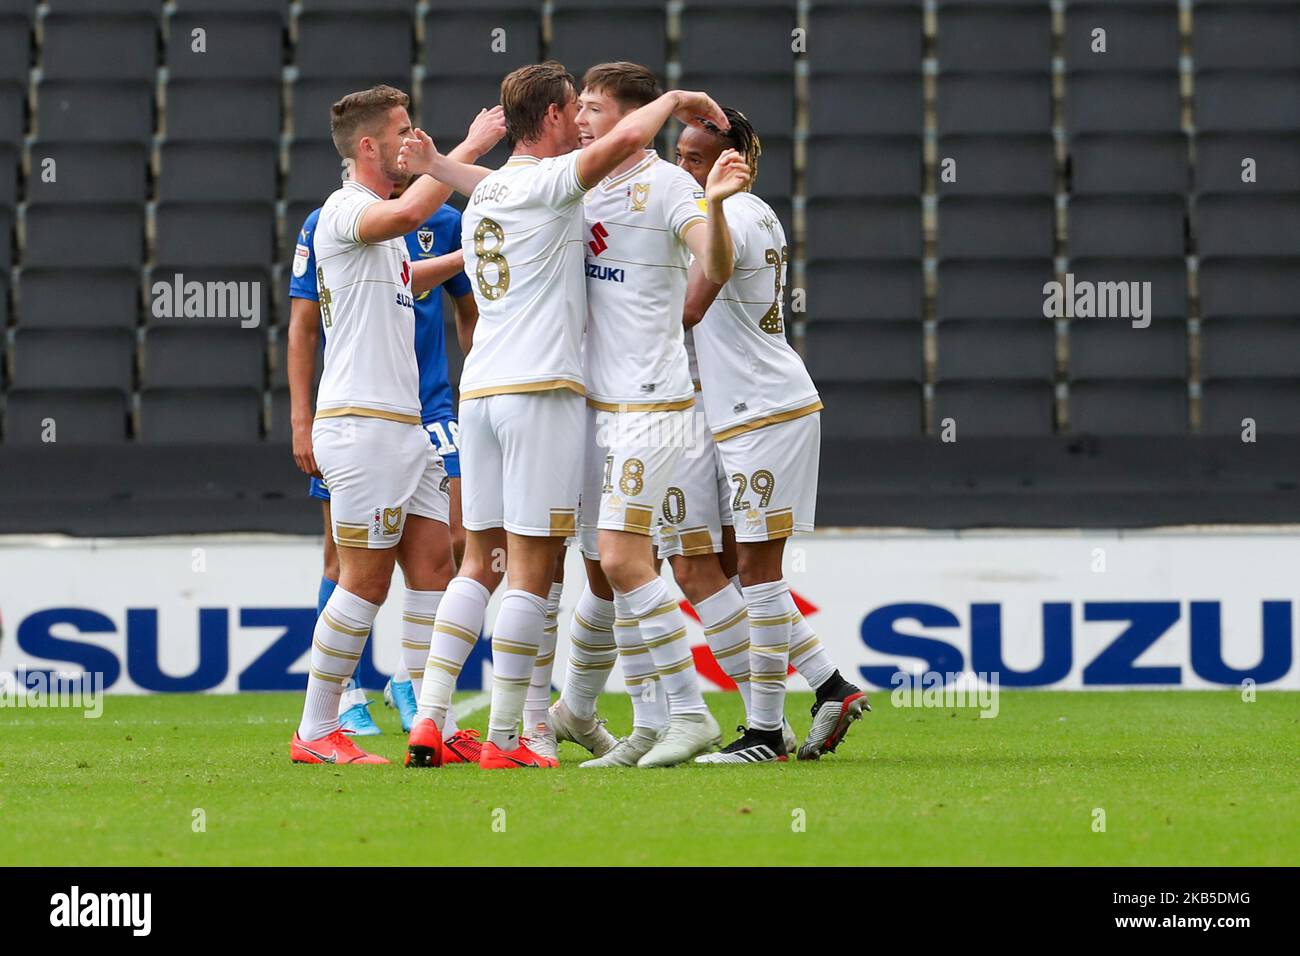 Rhys Healey celebrates after scoring for MK Dons, to extend their lead making it 2 - 0 against AFC Wimbledon, during the Sky Bet League 1 match between MK Dons and AFC Wimbledon at Stadium MK, Milton Keynes on Saturday 7th September 2019. (Photo by John Cripps/ MI News/NurPhoto) Stock Photo